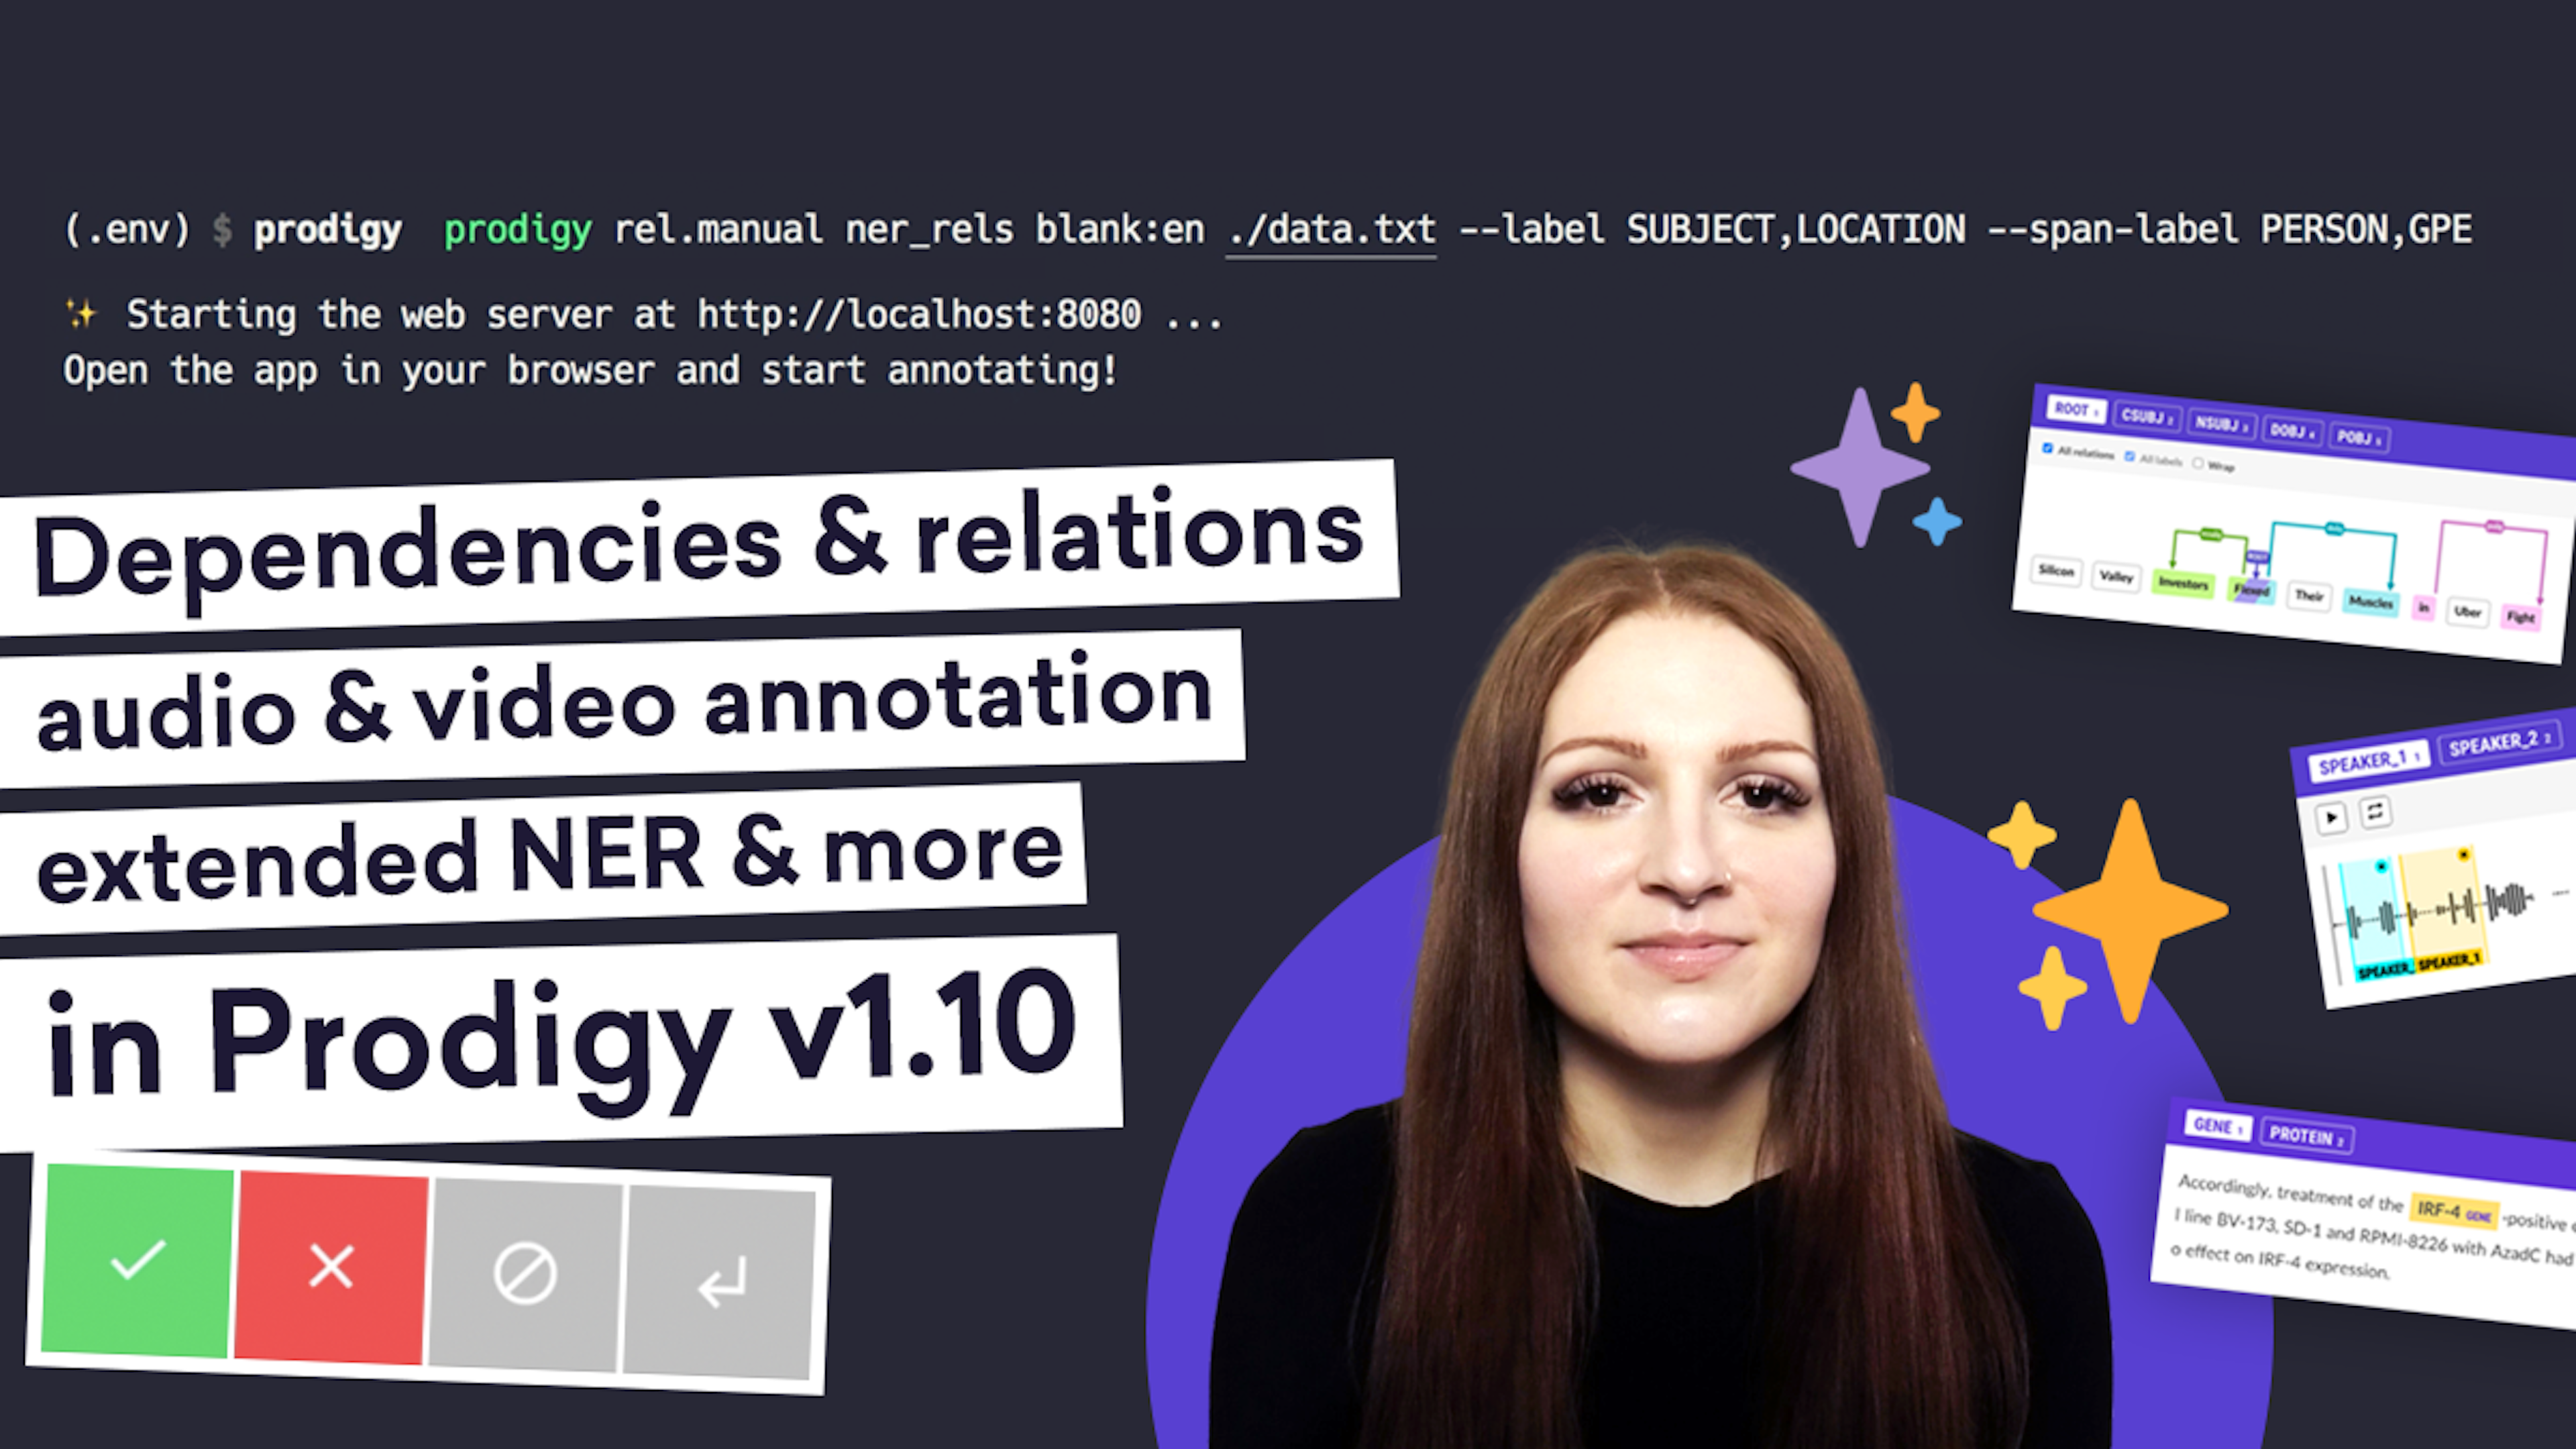 Prodigy v1.10: Dependencies, relations, audio, video & more